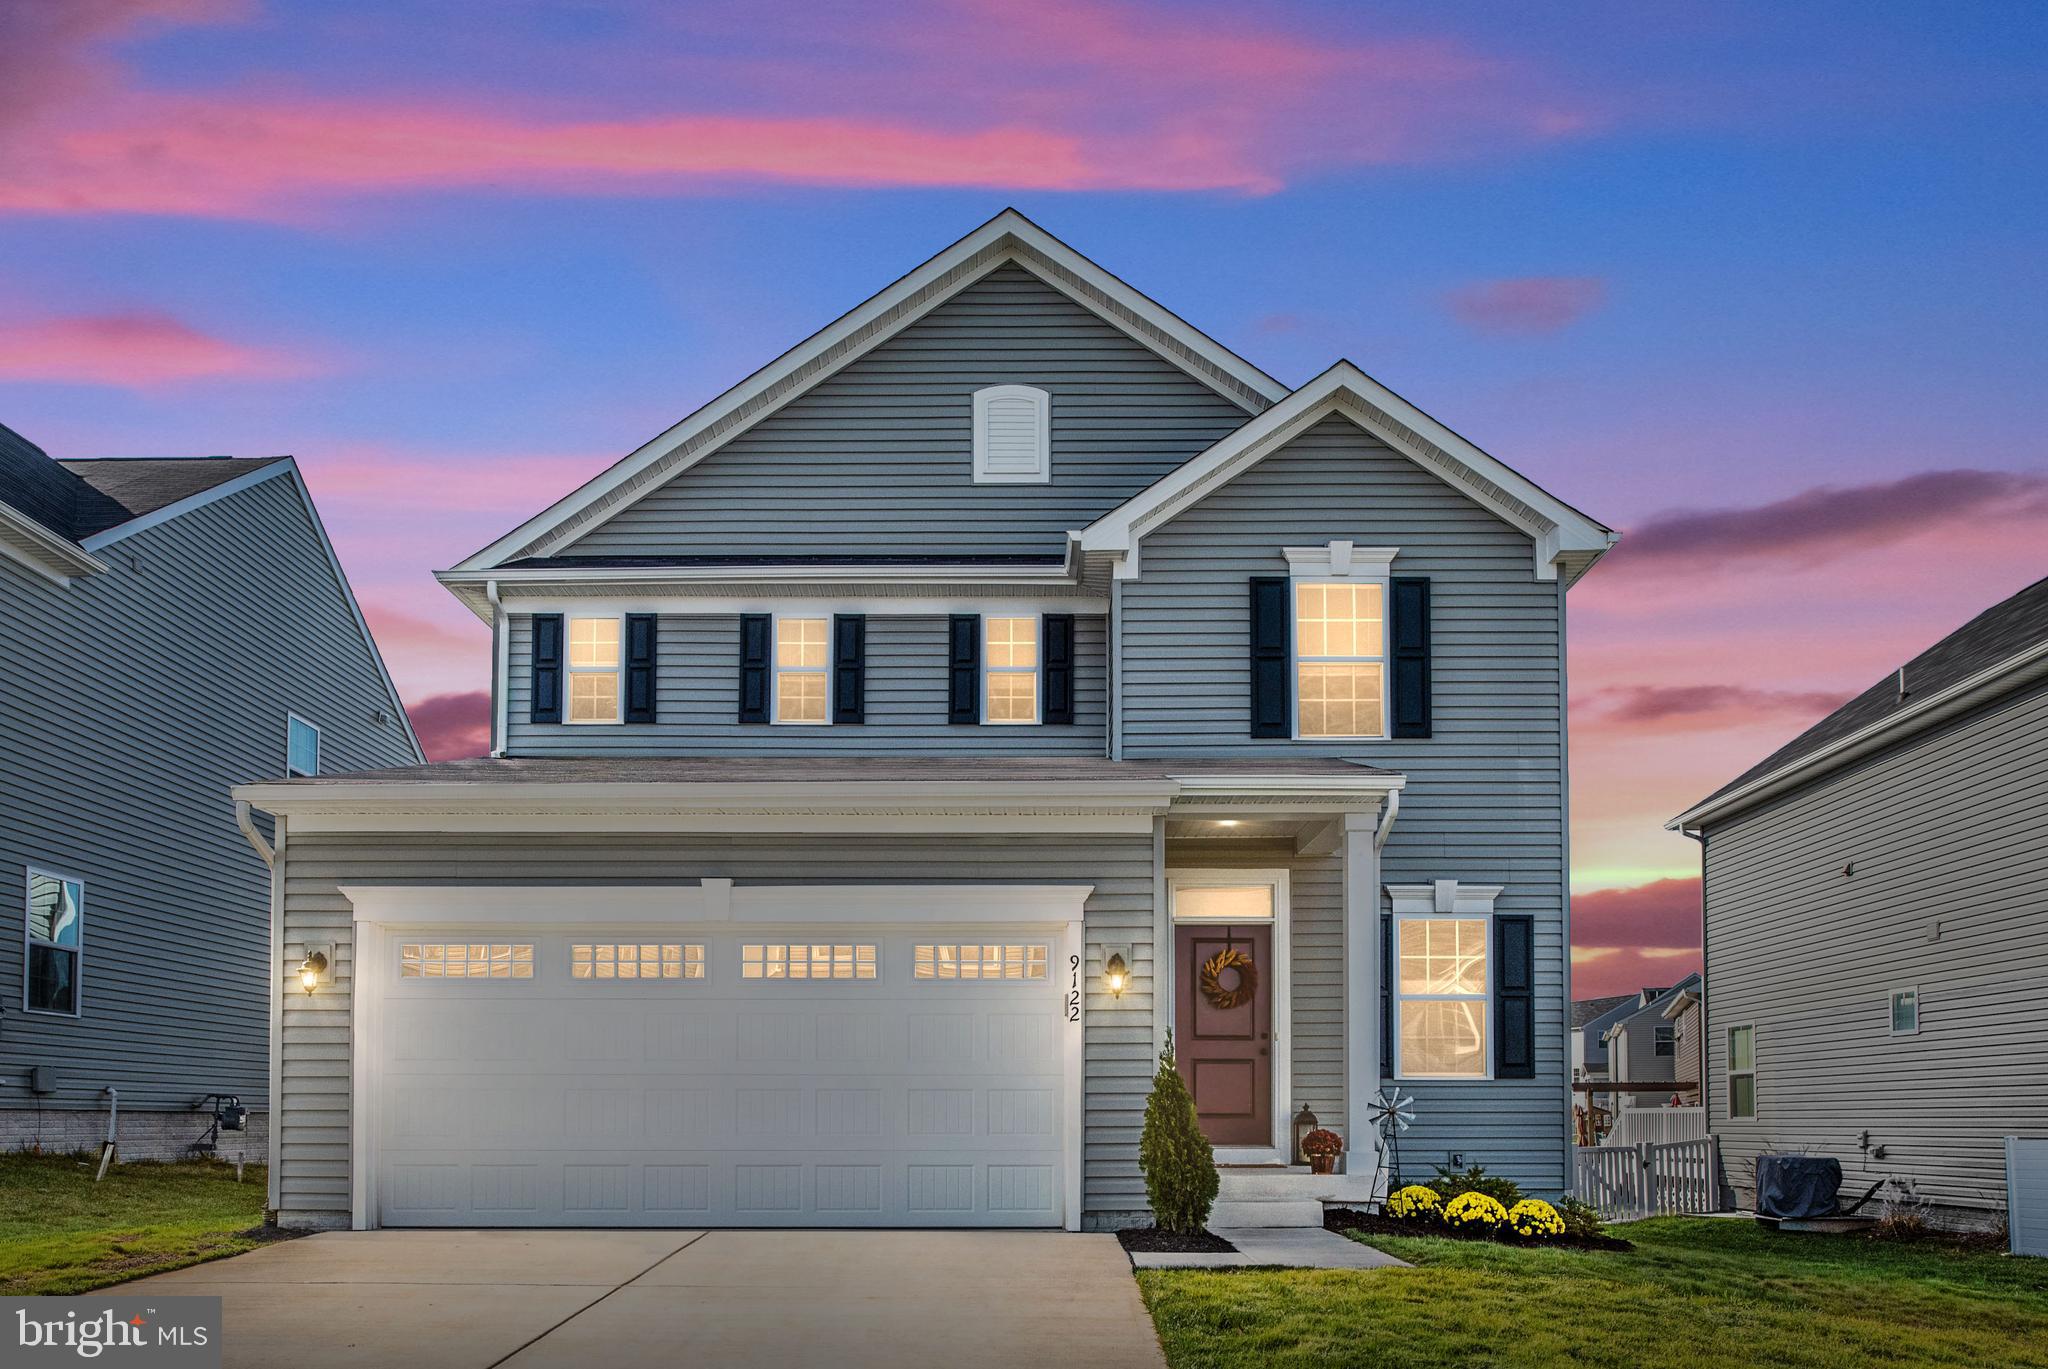 This beautiful two year old Allegheny (open floor plan) model by Ryan Homes is ready for its new owners. Located in the highly sought after Lees Parke subdivision just minutes from I95, the VRE, Spotsylvania Regional Hospital, shopping and so much more. All four bedrooms are on the upper level as well as two full bathrooms, and the laundry room - no more lugging loads of laundry up and down the stairs. The basement is finished with an open concept, and additional unfinished space for your custom design. The outdoor entertaining area features a stamped concrete patio, and 17' x 12' covered area with additional 12' privacy screening it is truly one of a kind. Schedule a time to tour this beautiful home, and make your move in 2023.